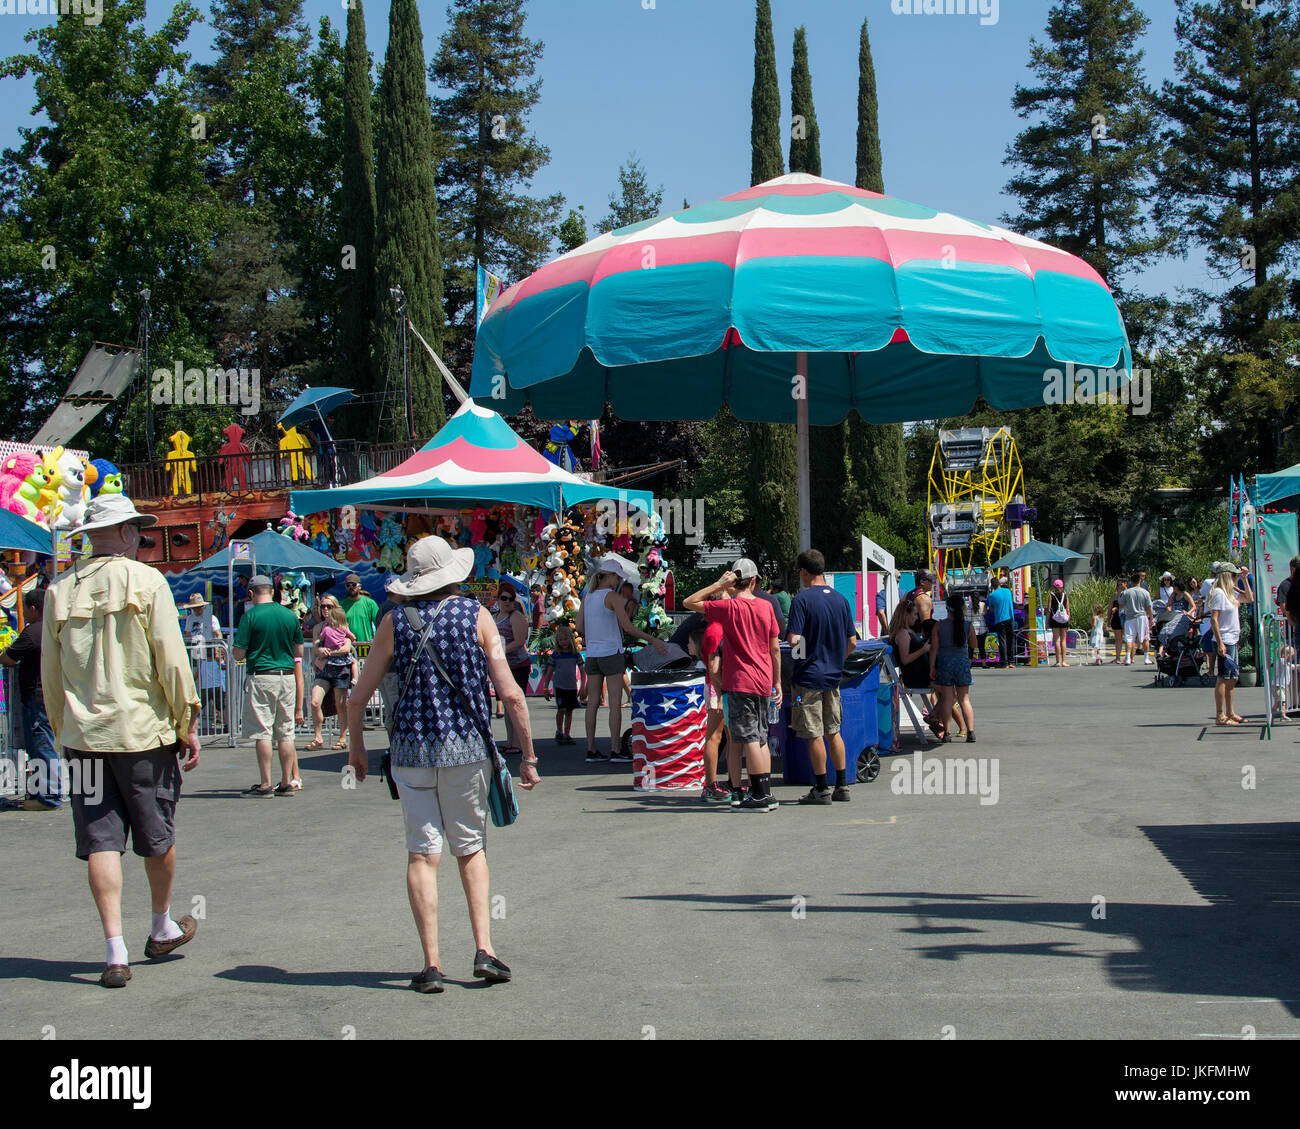 Sacramento, California, USA. 23rd July, 2017.  Overview of the California State Fair, which is happening now. State fairs are competitive and recreational gatherings, and happen annually in the U.S. late summer to early fall. Credit: AlessandraRC/Alamy Live News Stock Photo